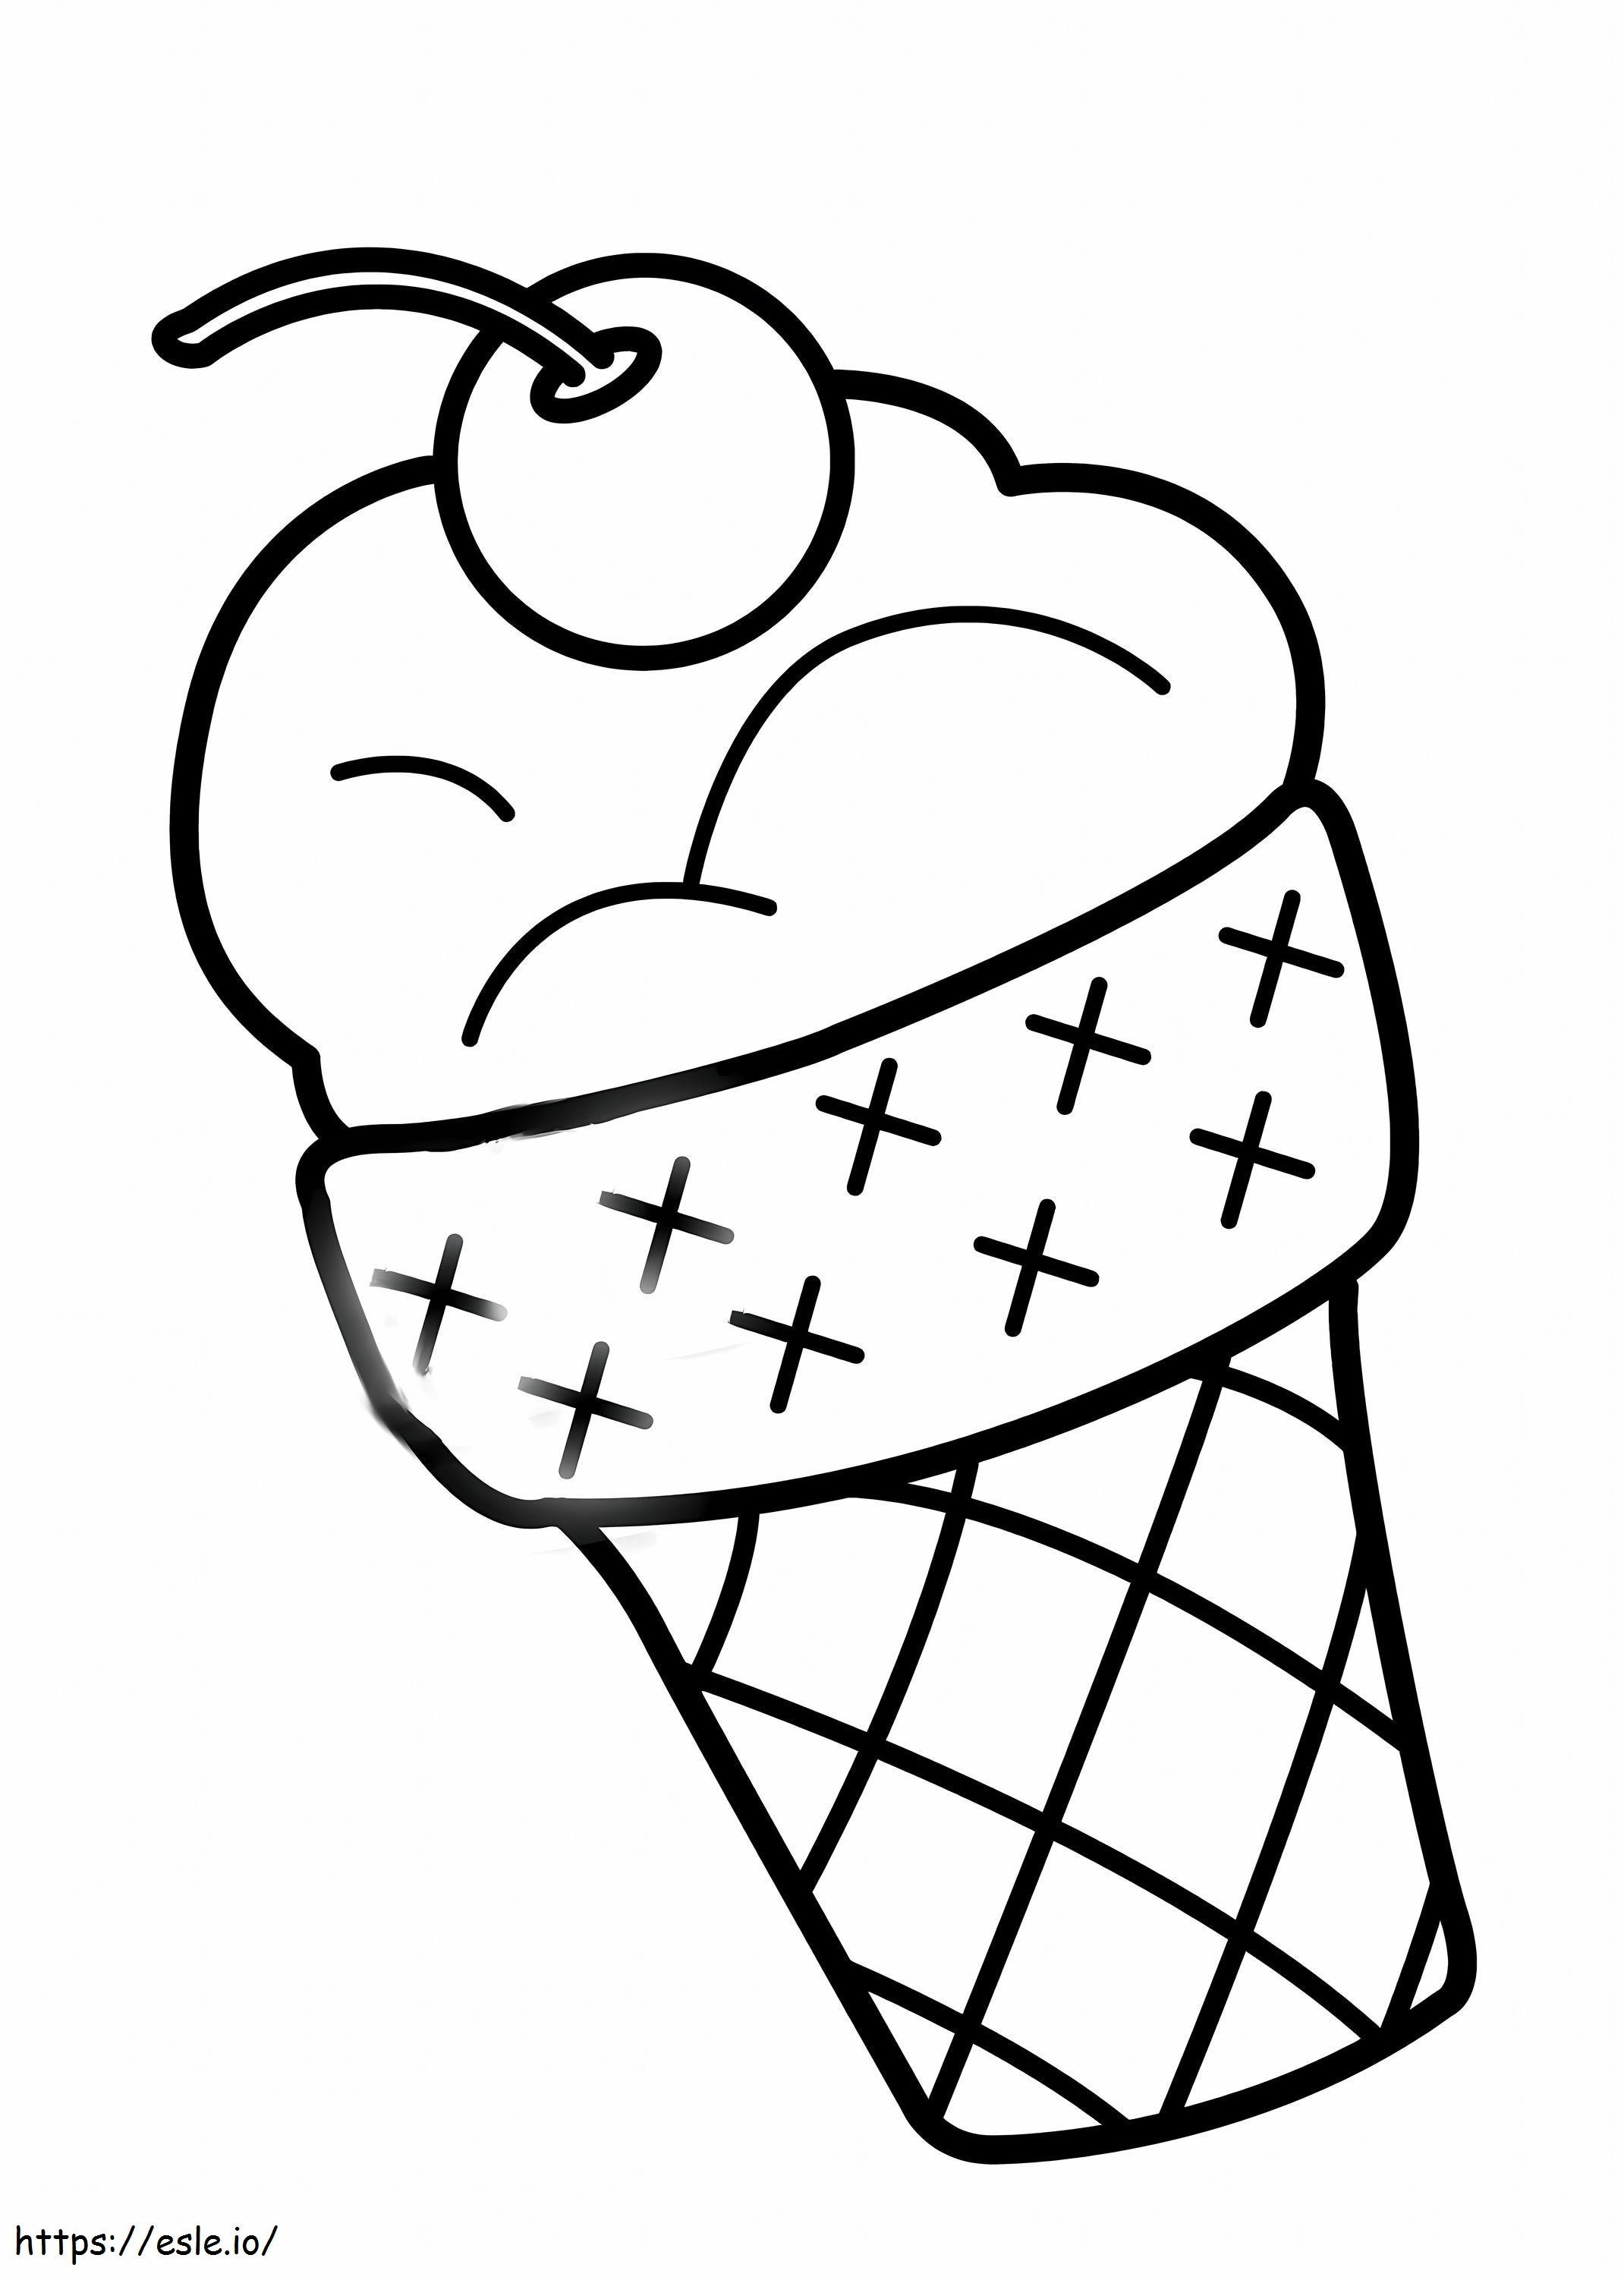 Ice Cream In The Summer coloring page